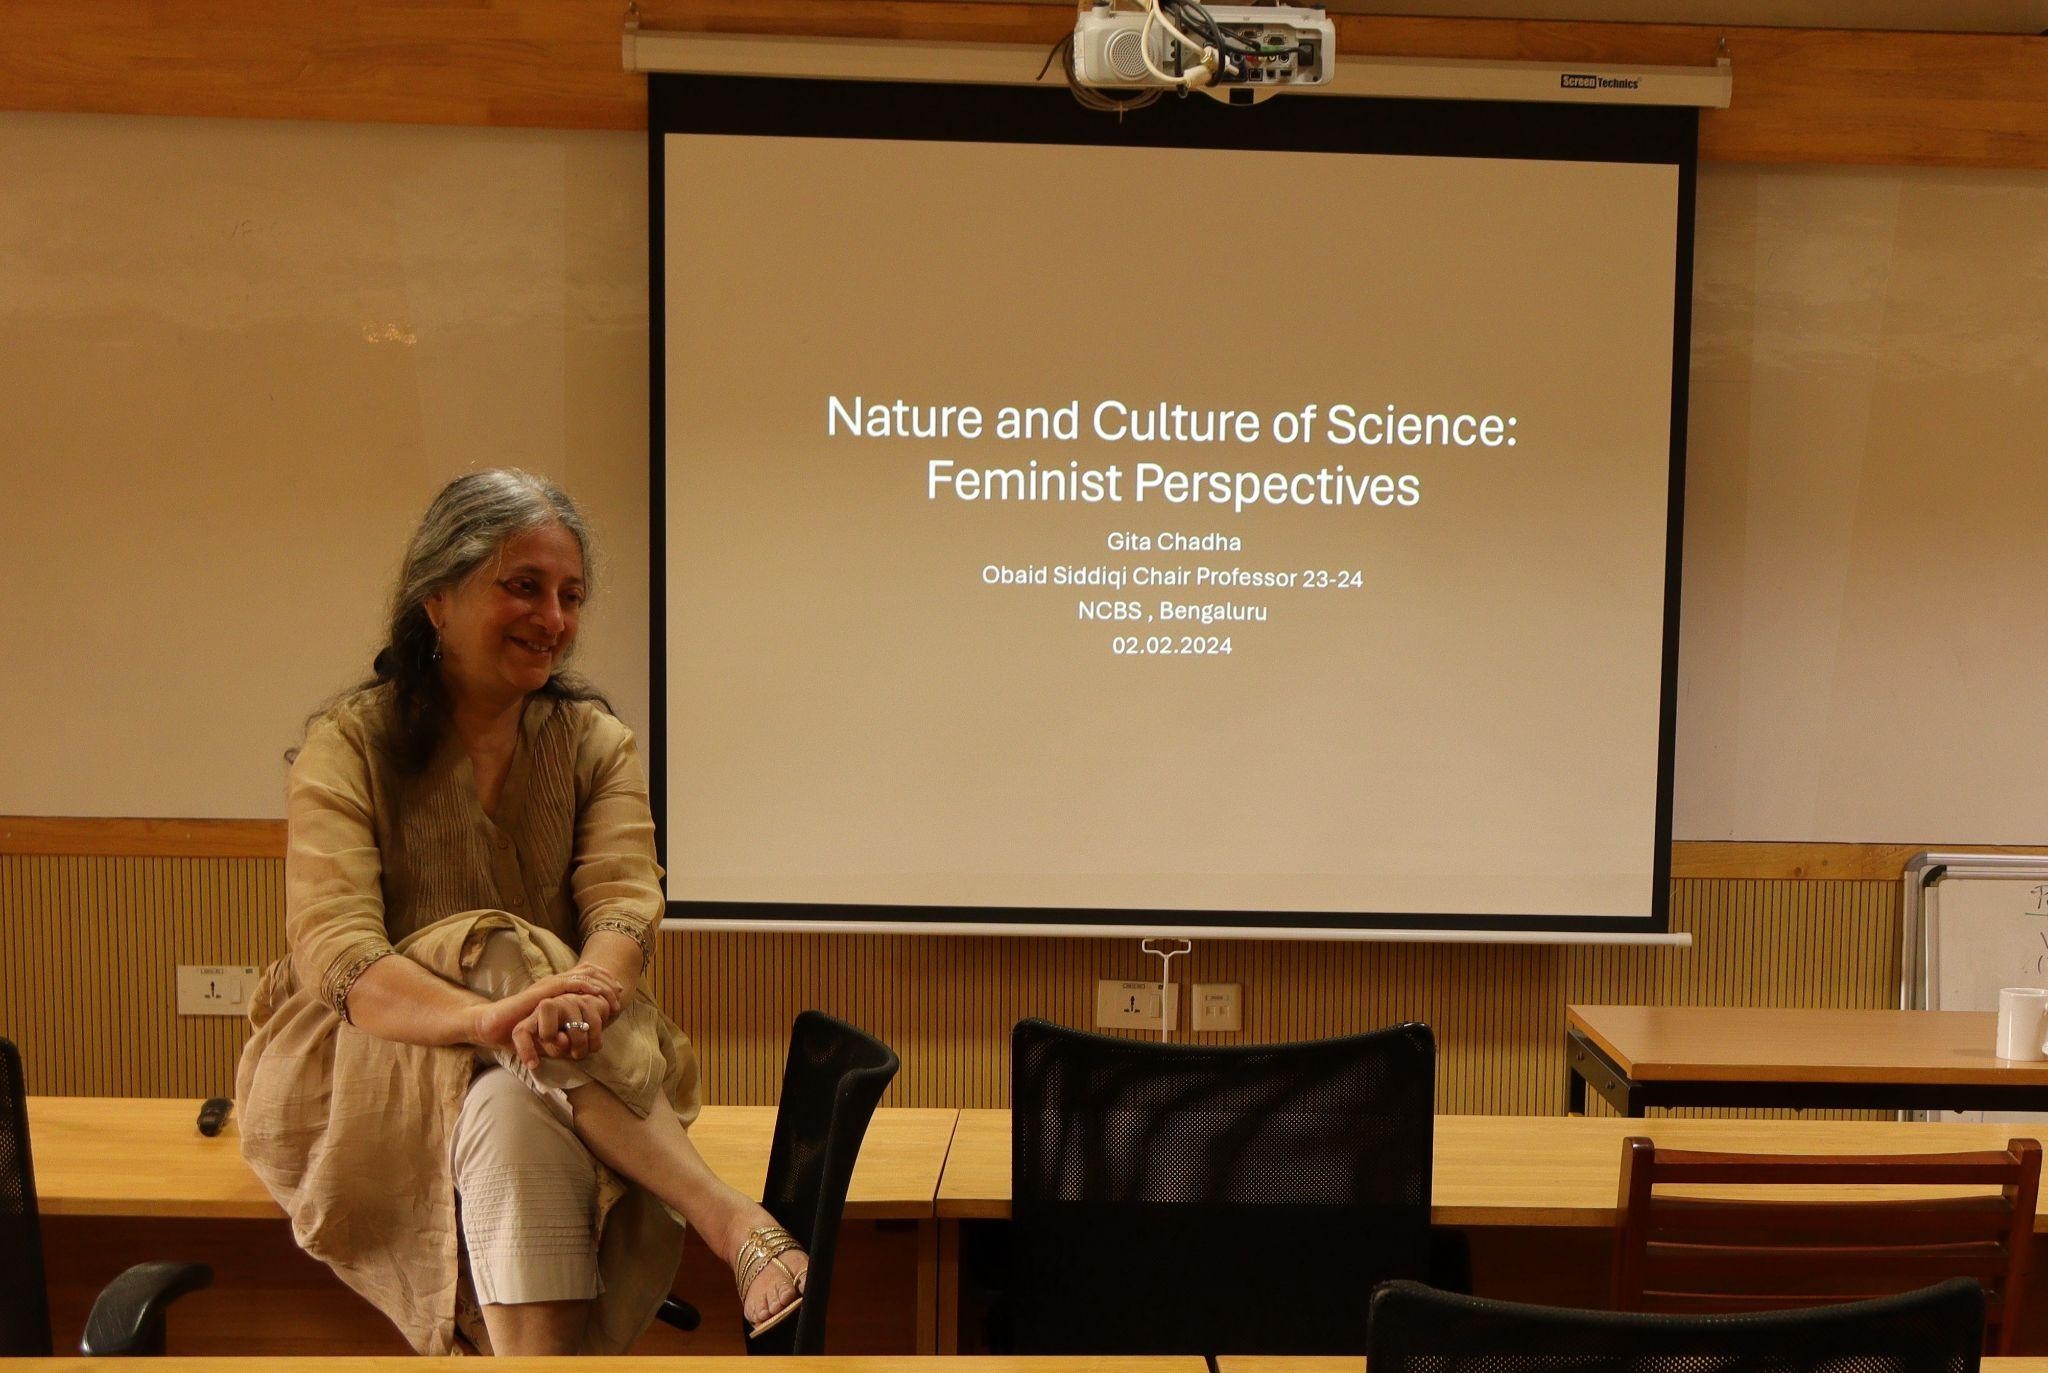 Exploring the feminist perspectives in science & society with Prof. Gita Chadha